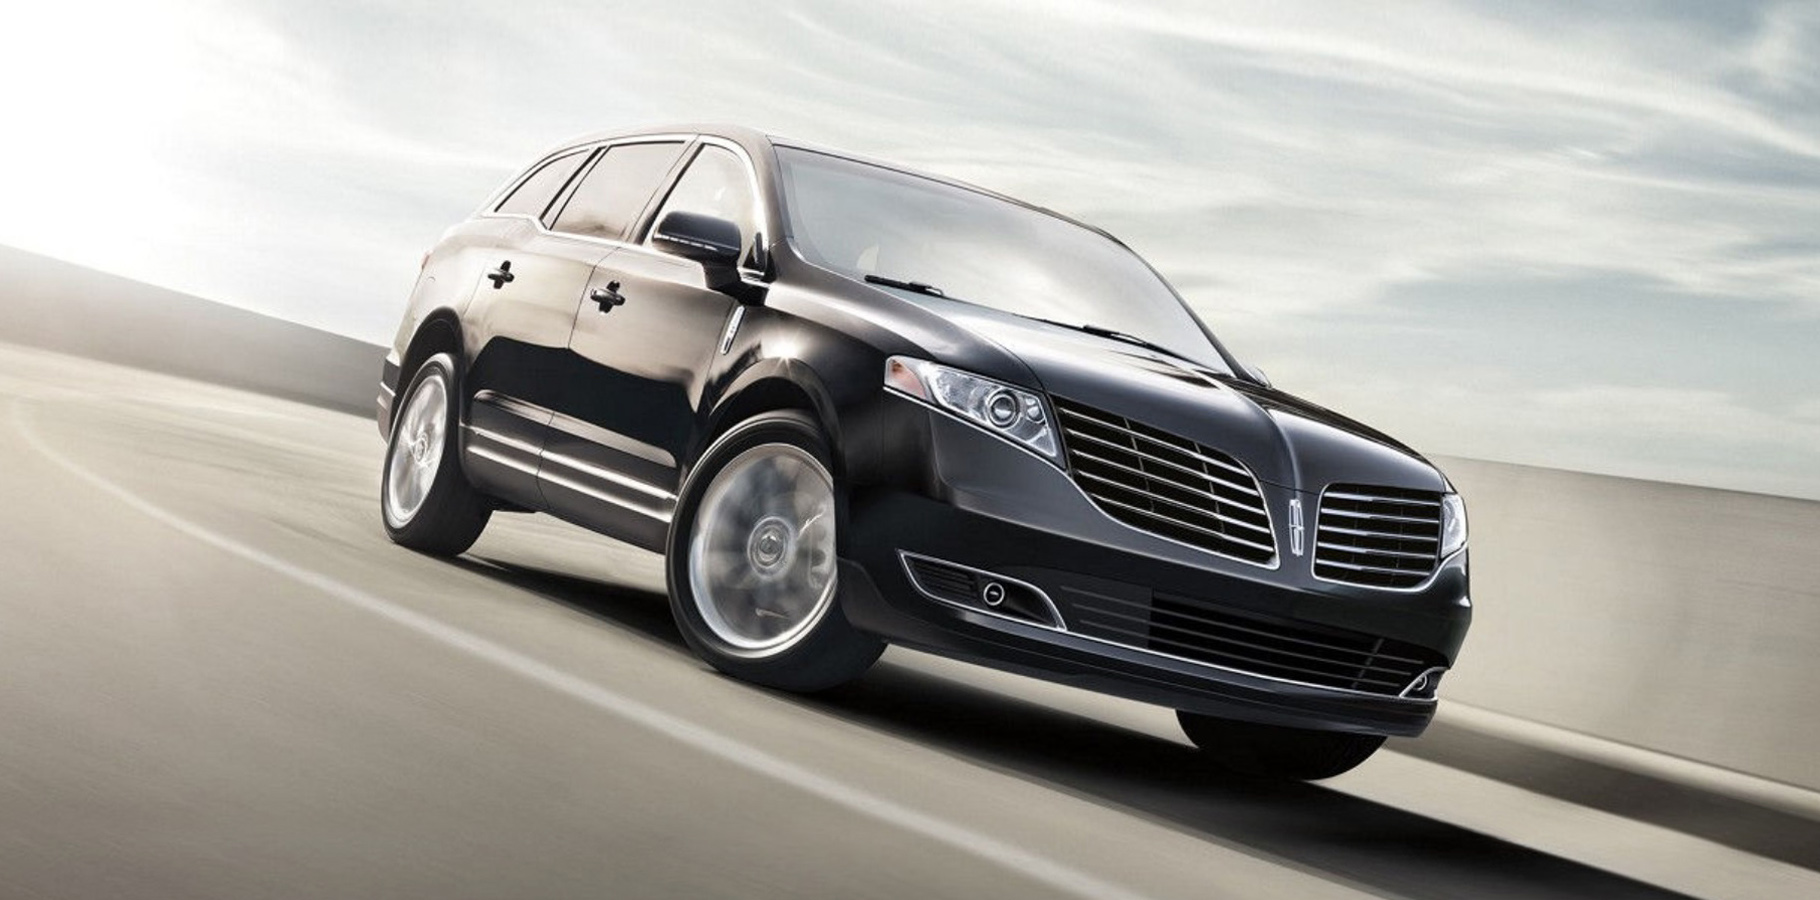 Introducing Chicago’s Best Limousine and Private Car Service